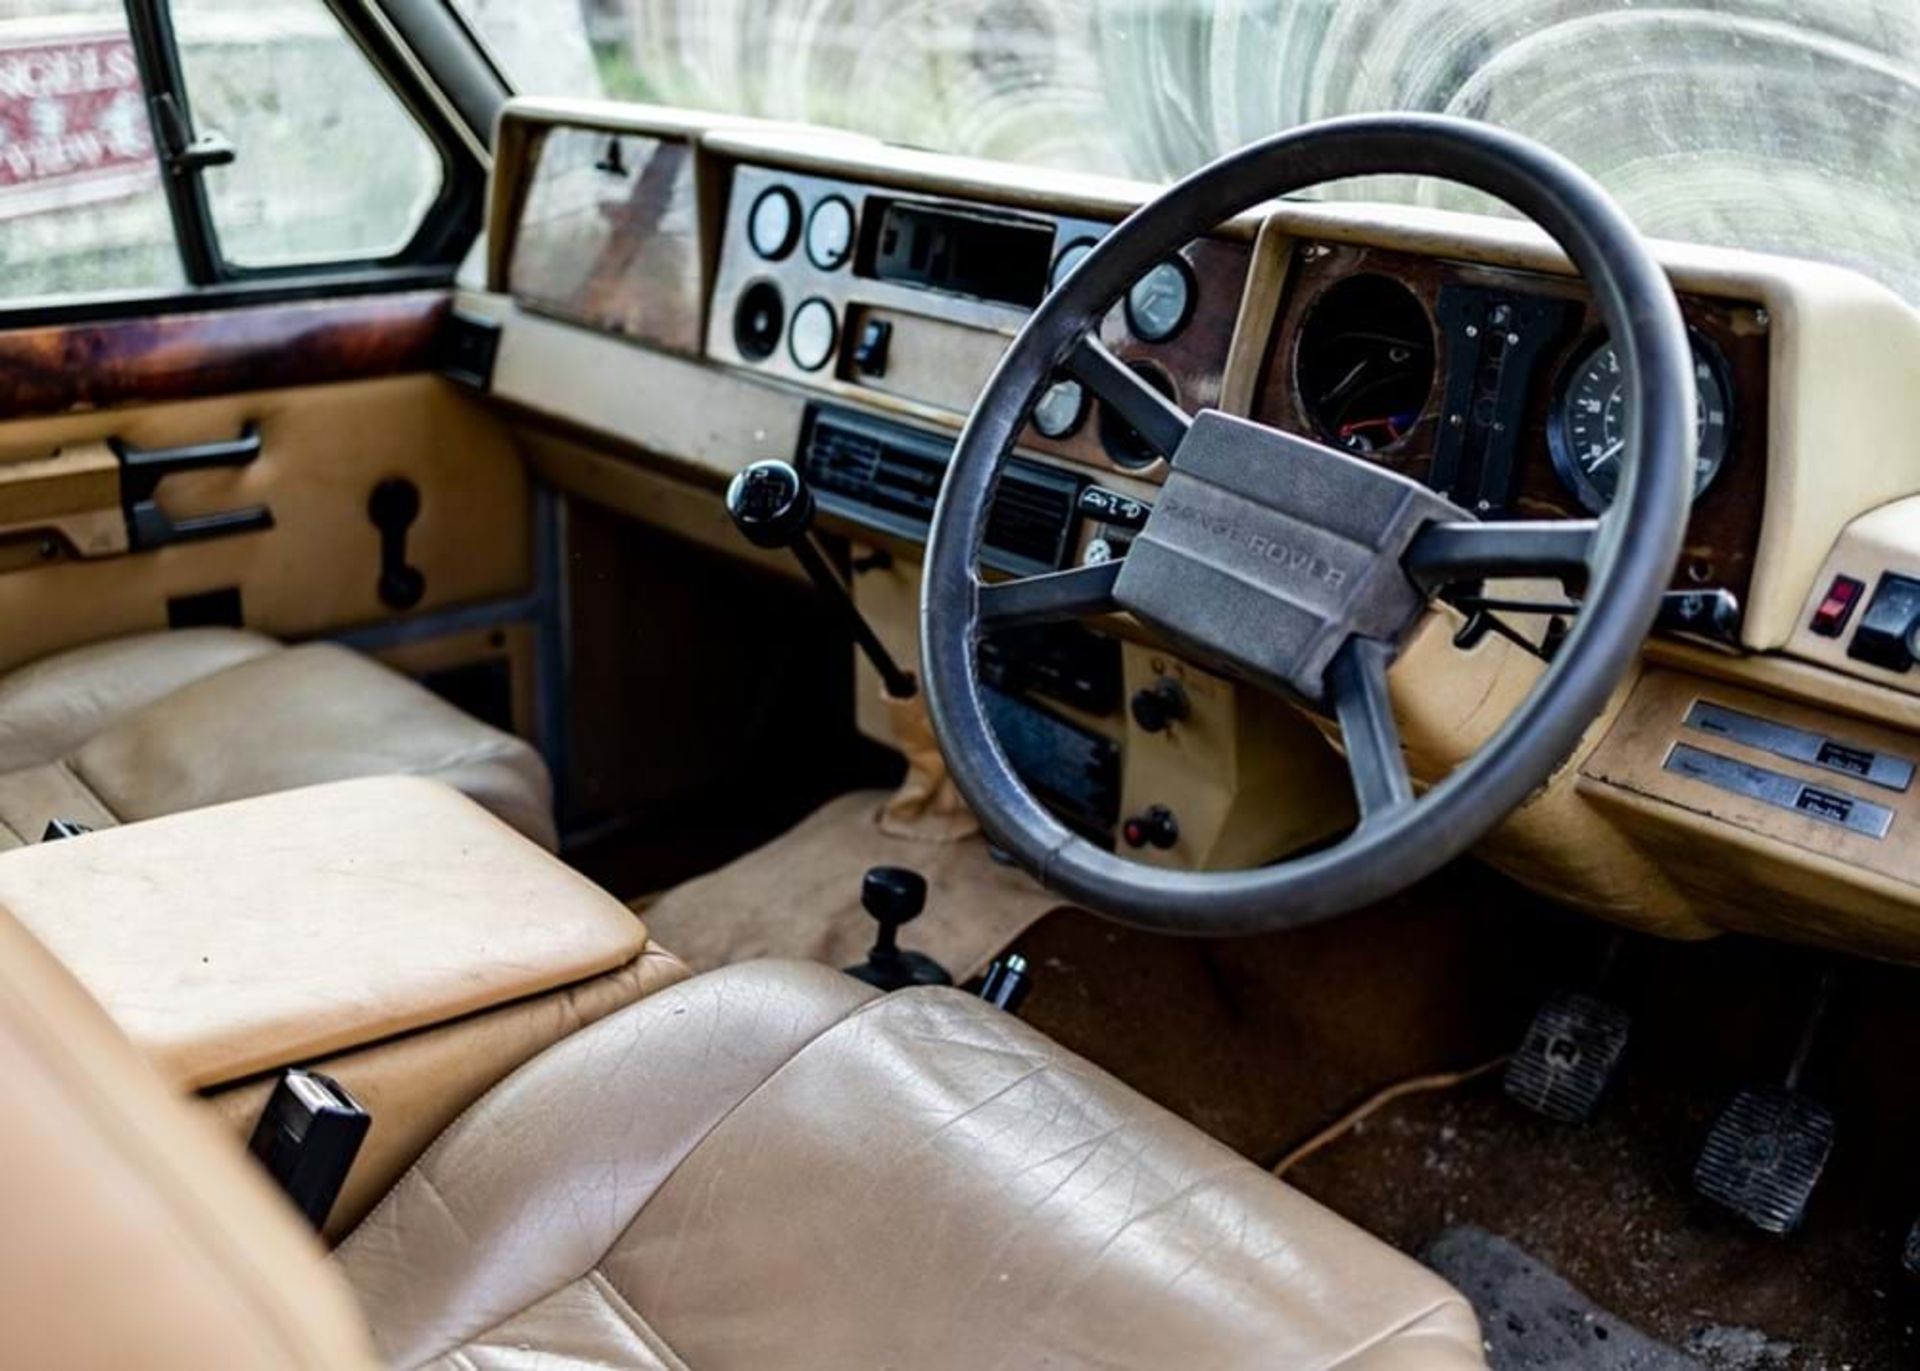 1971 Range Rover by Wood & Pickett - Image 6 of 9